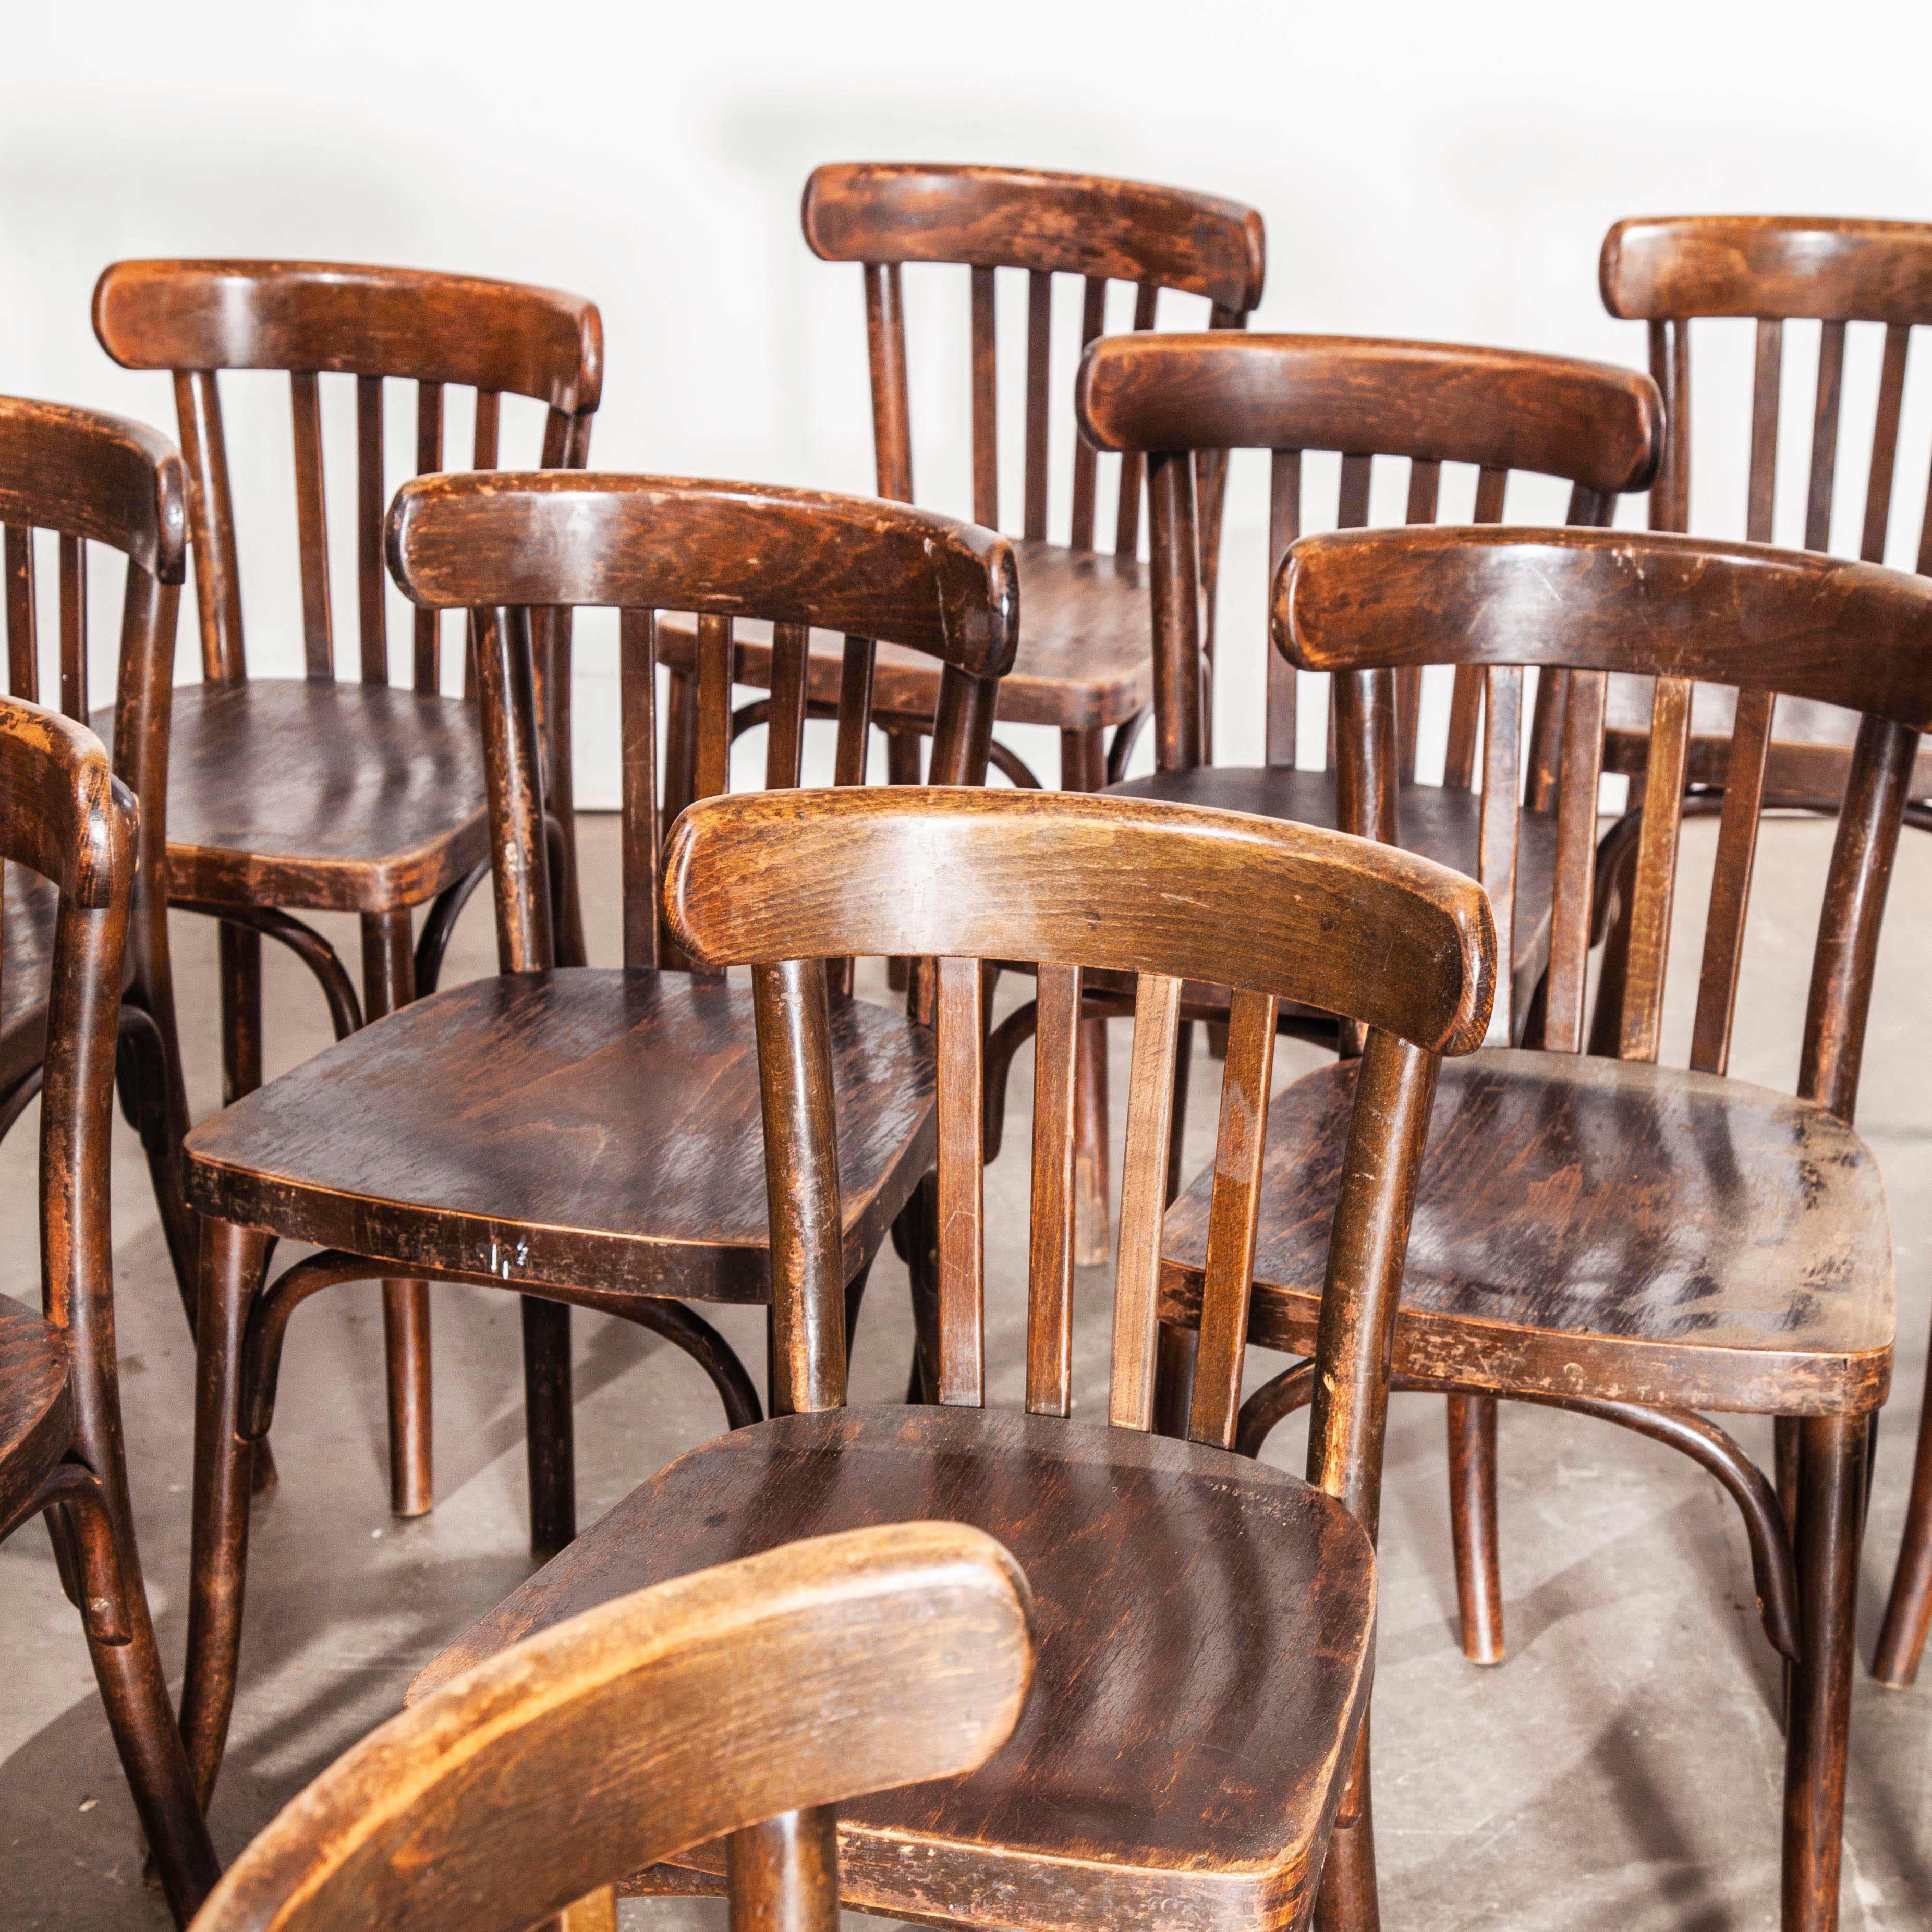 1930s original marked Thonet bentwood dining chairs, dark stained beech, set of twelve
Set of twelve 1930s original marked Thonet bentwood dining chairs, dark stained beech. These chairs are one of our favourite finds this year from an abandoned